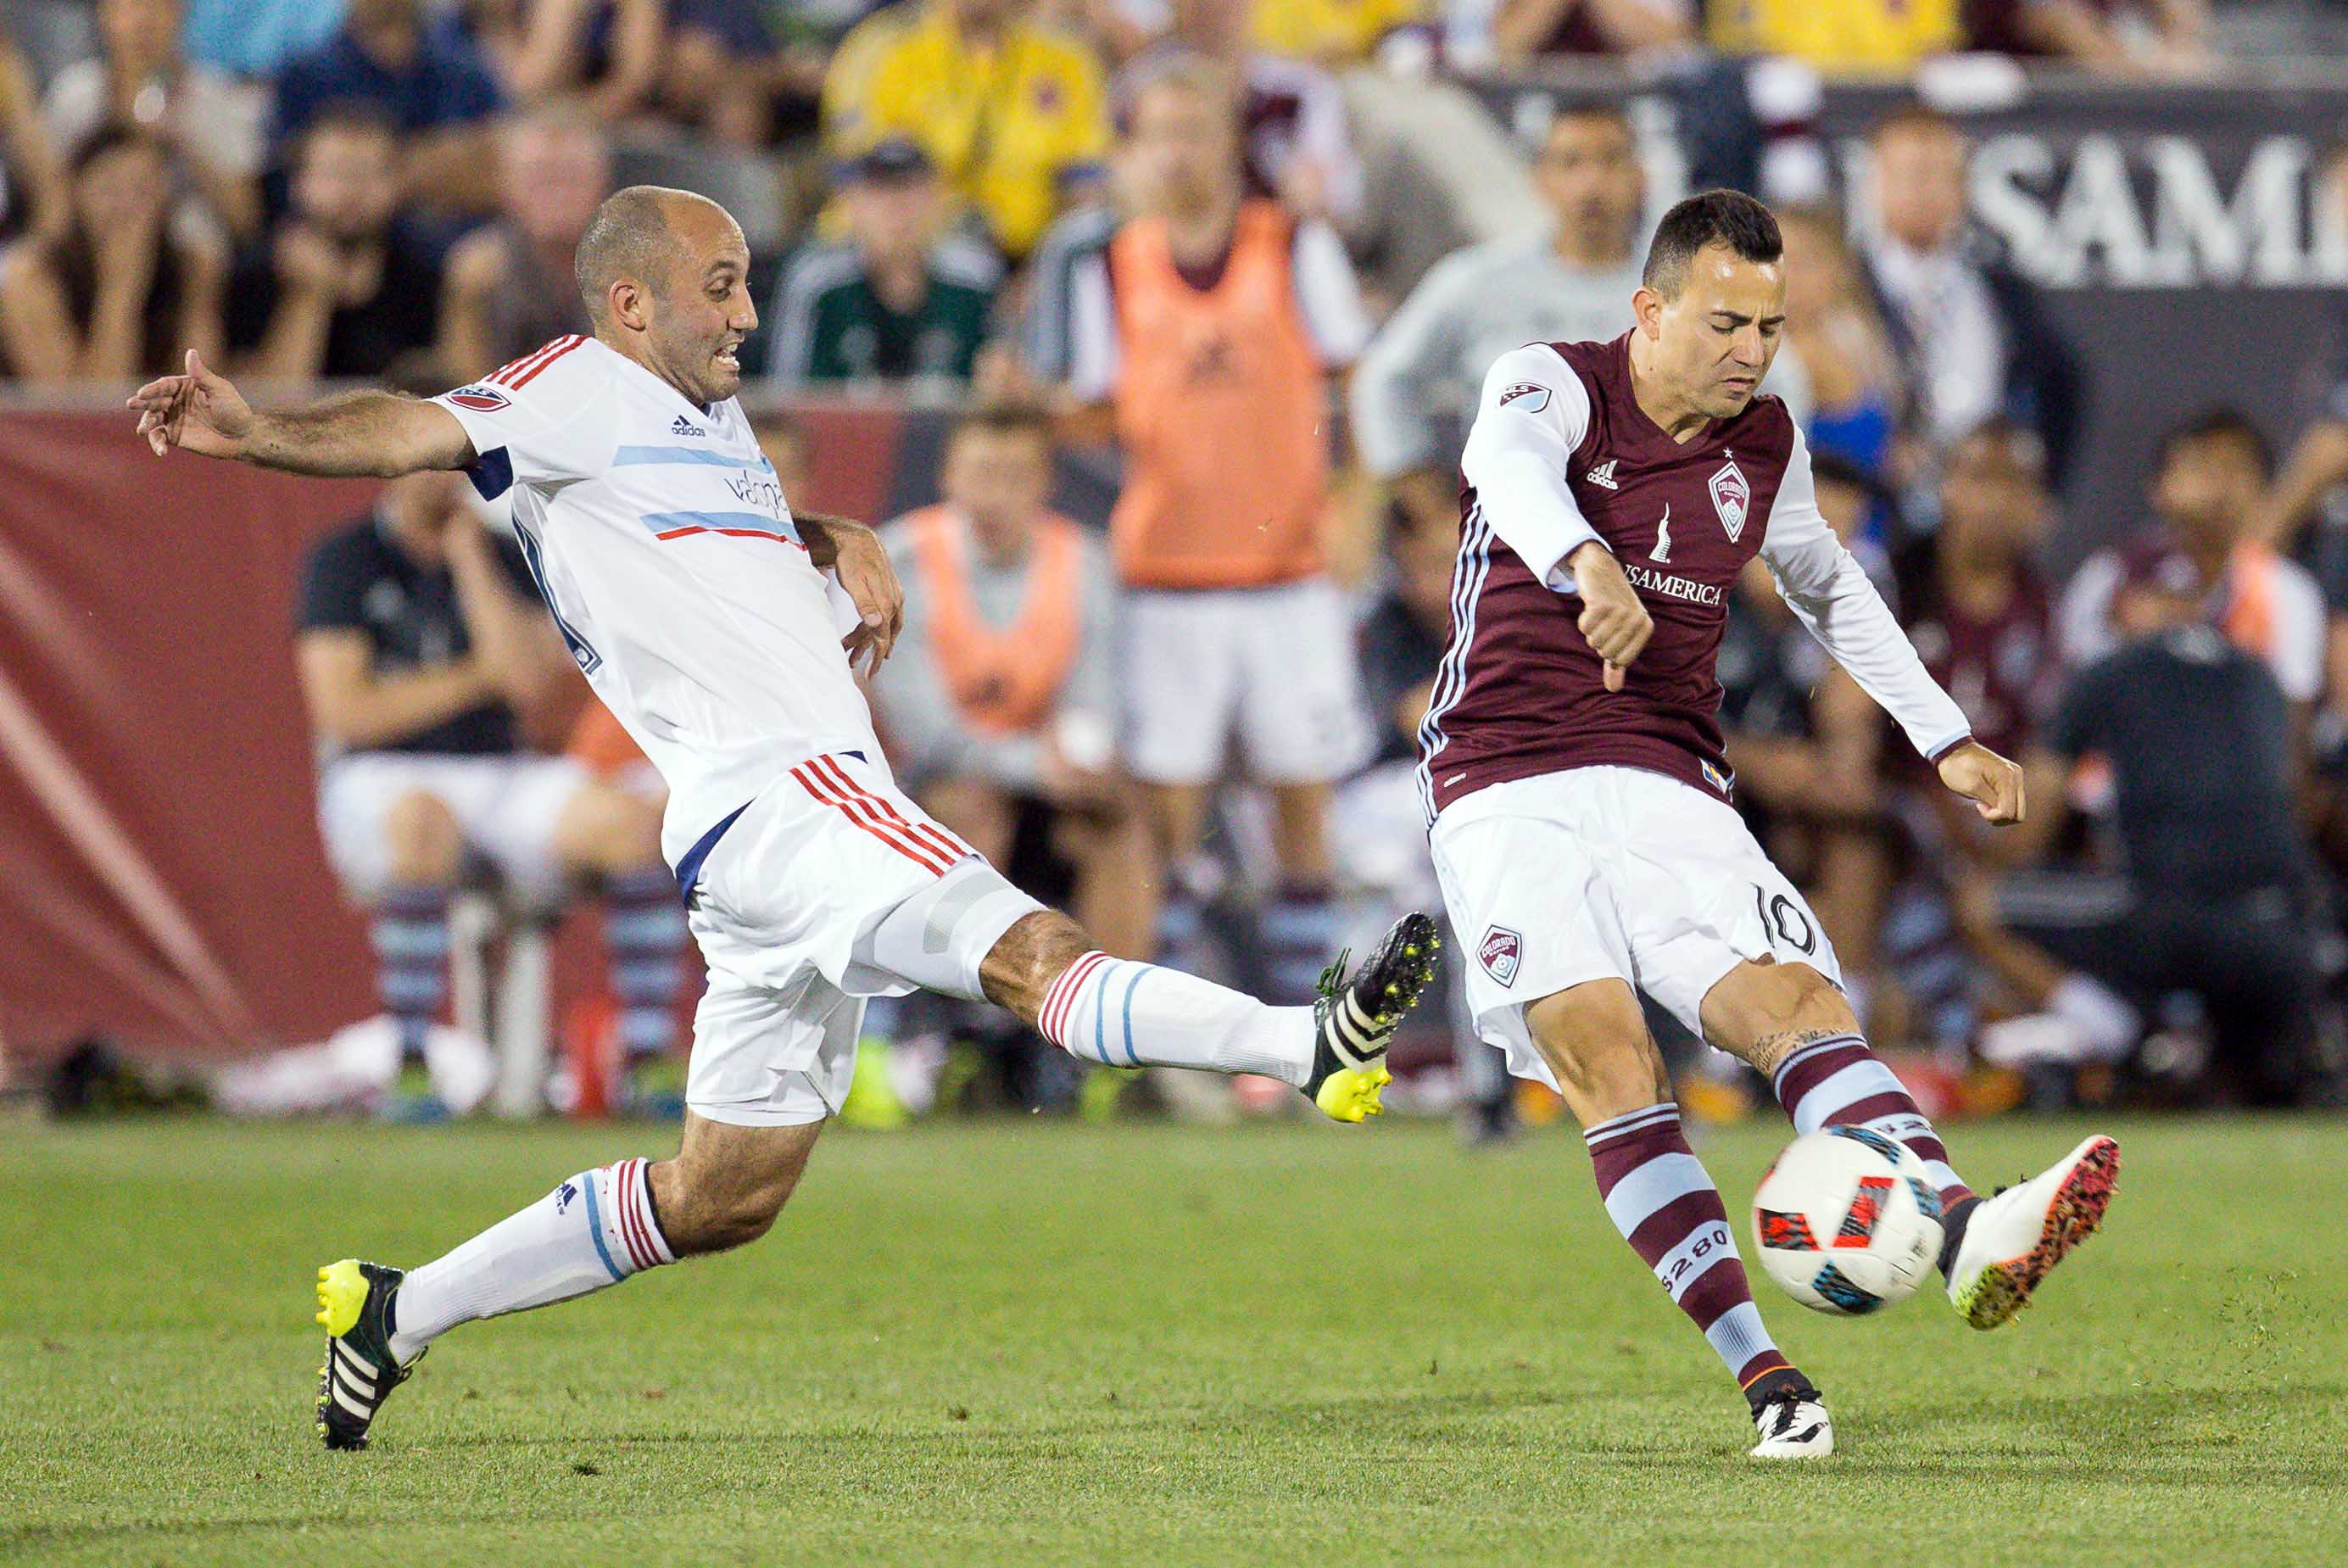 Marco Pappa taking a shot against former Rapids player Nick LaBrocca.